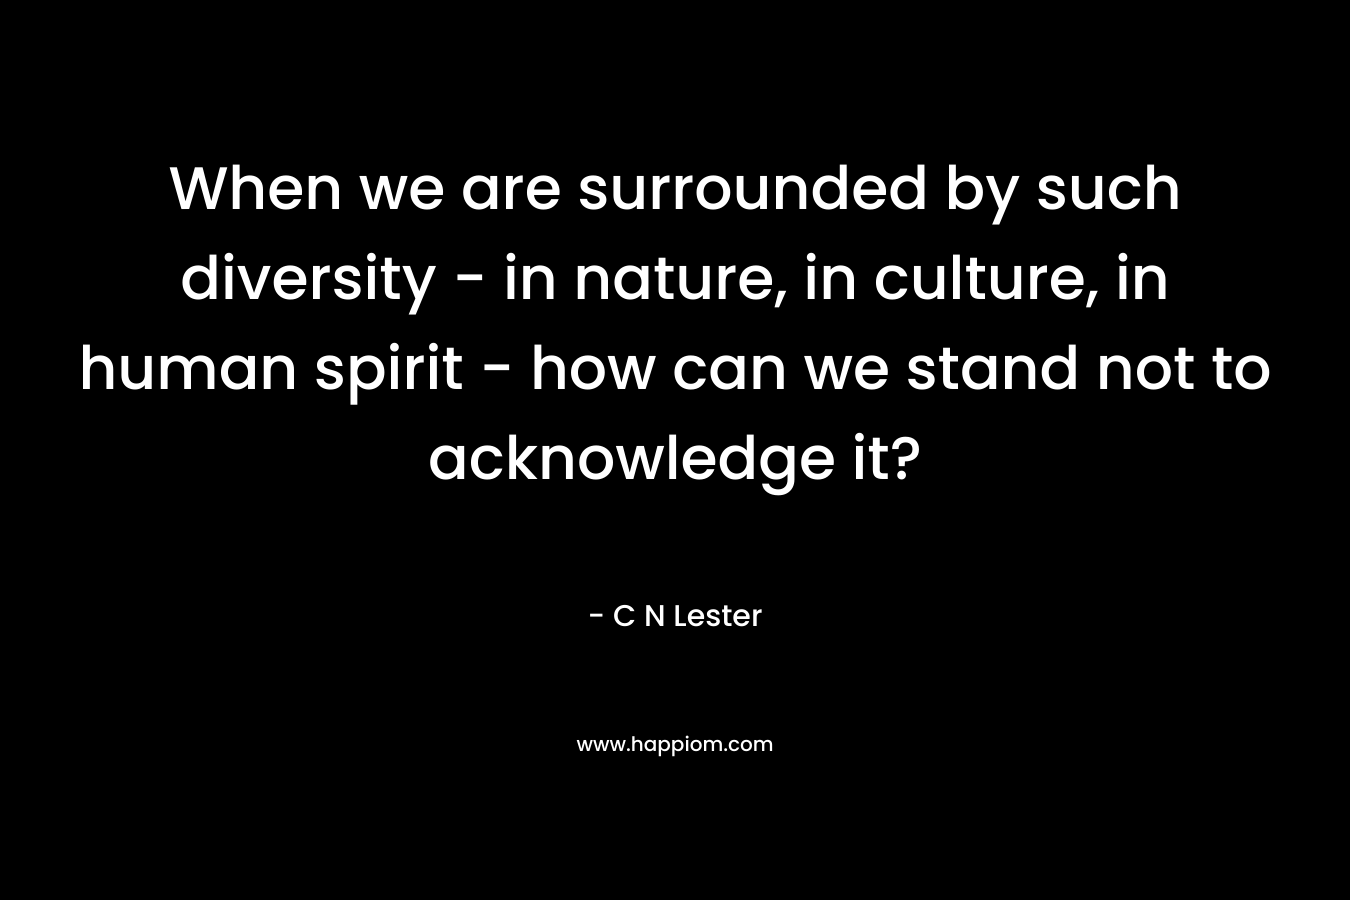 When we are surrounded by such diversity – in nature, in culture, in human spirit – how can we stand not to acknowledge it? – C N Lester